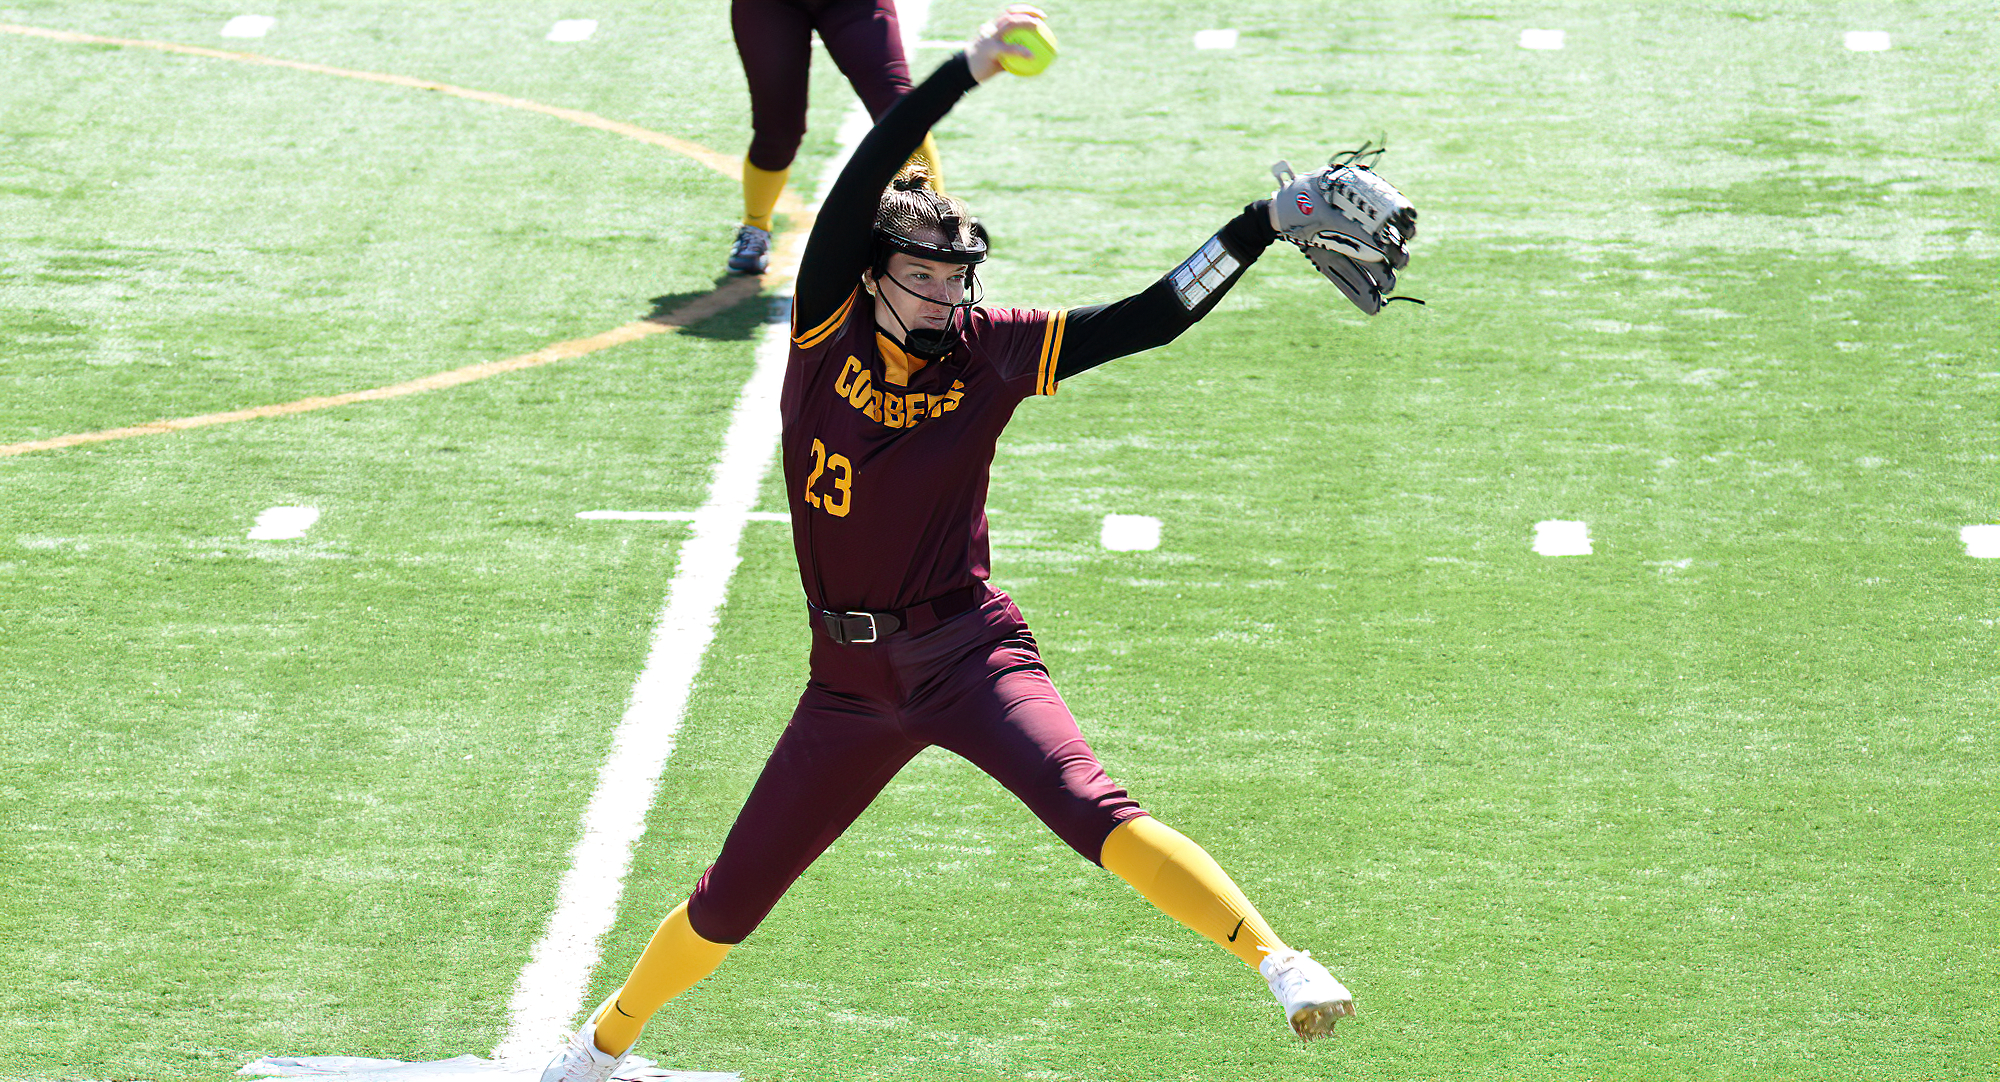 Senior Megan Gavin delivers a pitch during the Cobbers' DH with Bethel. Gavin pitched all 14 innings, struck out 21 and only allowed one earned run.